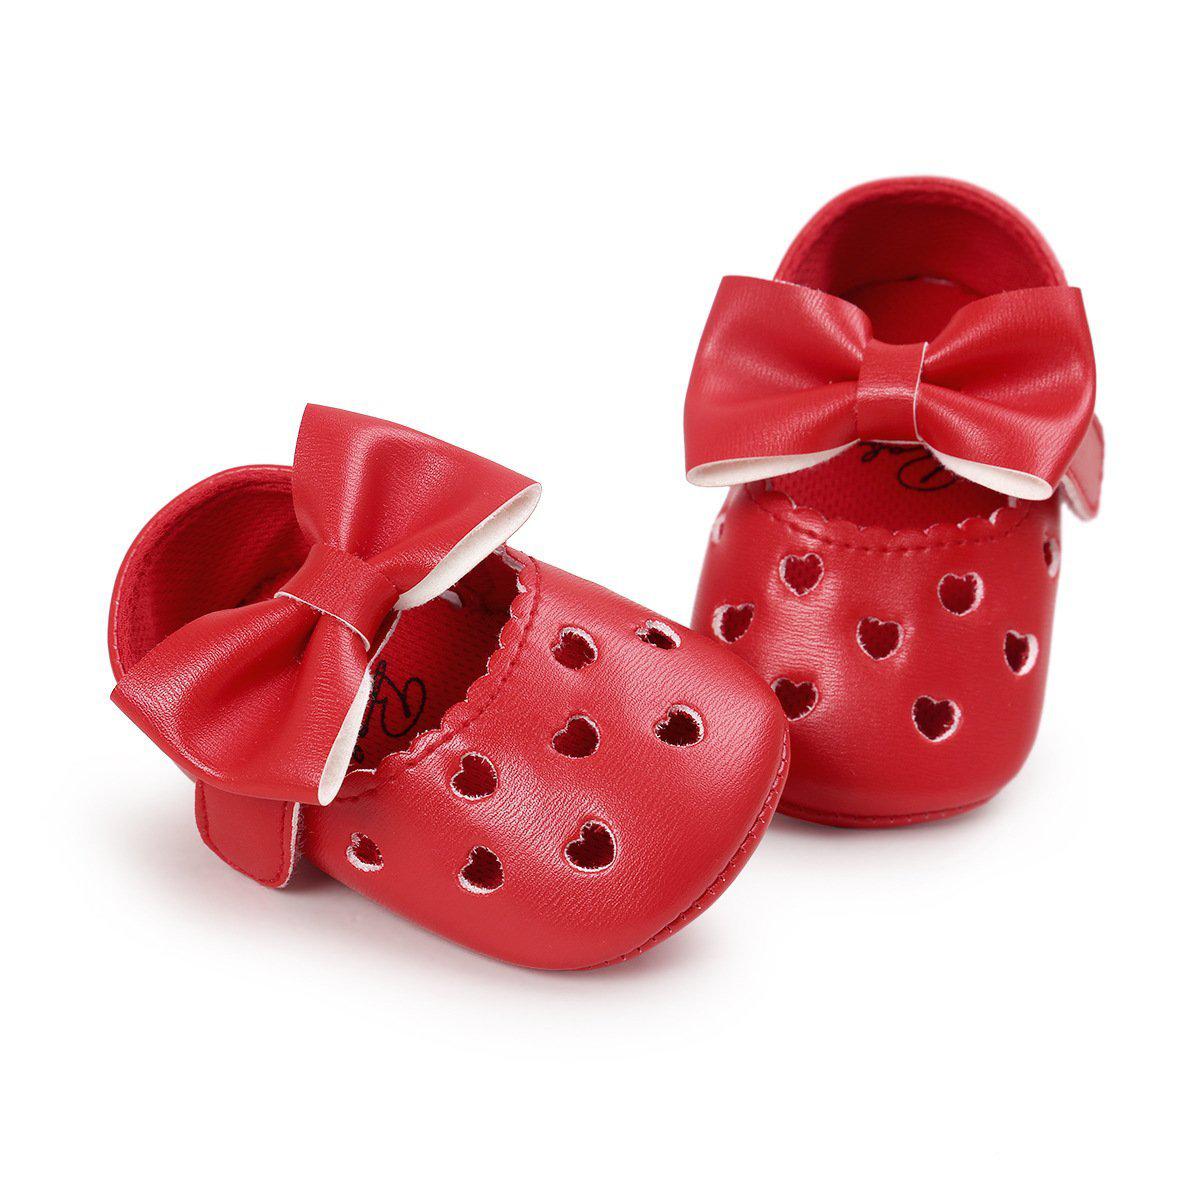 Baby Love Hollow Out Shoes  0-18m pawlulu